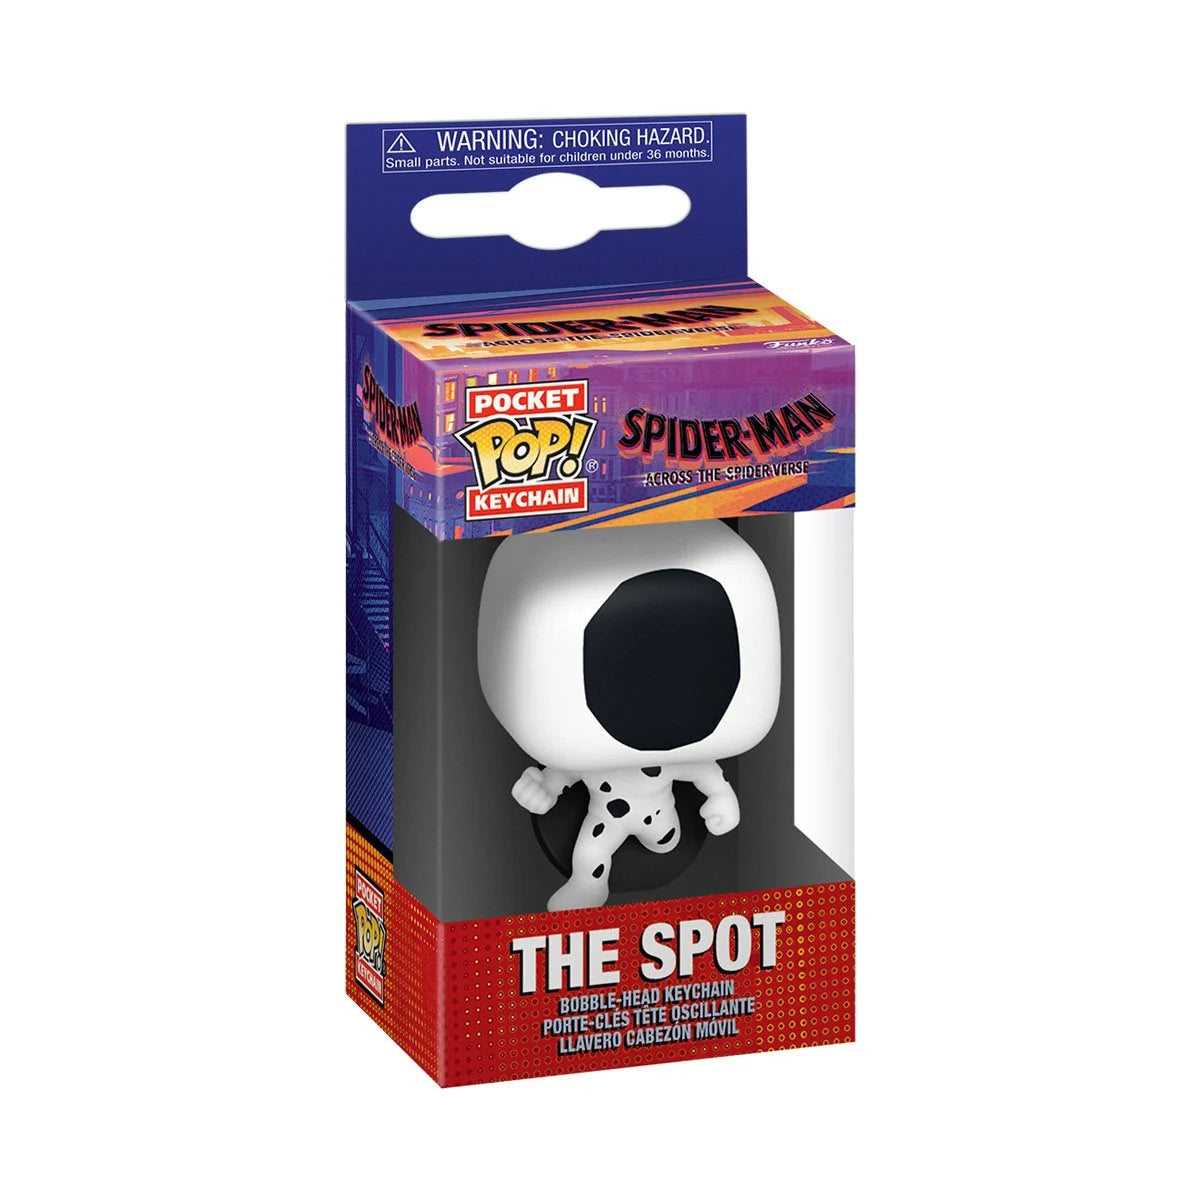 The Spot Across the Spider-Verse Spider-Man Pocket Pop! Key Chain